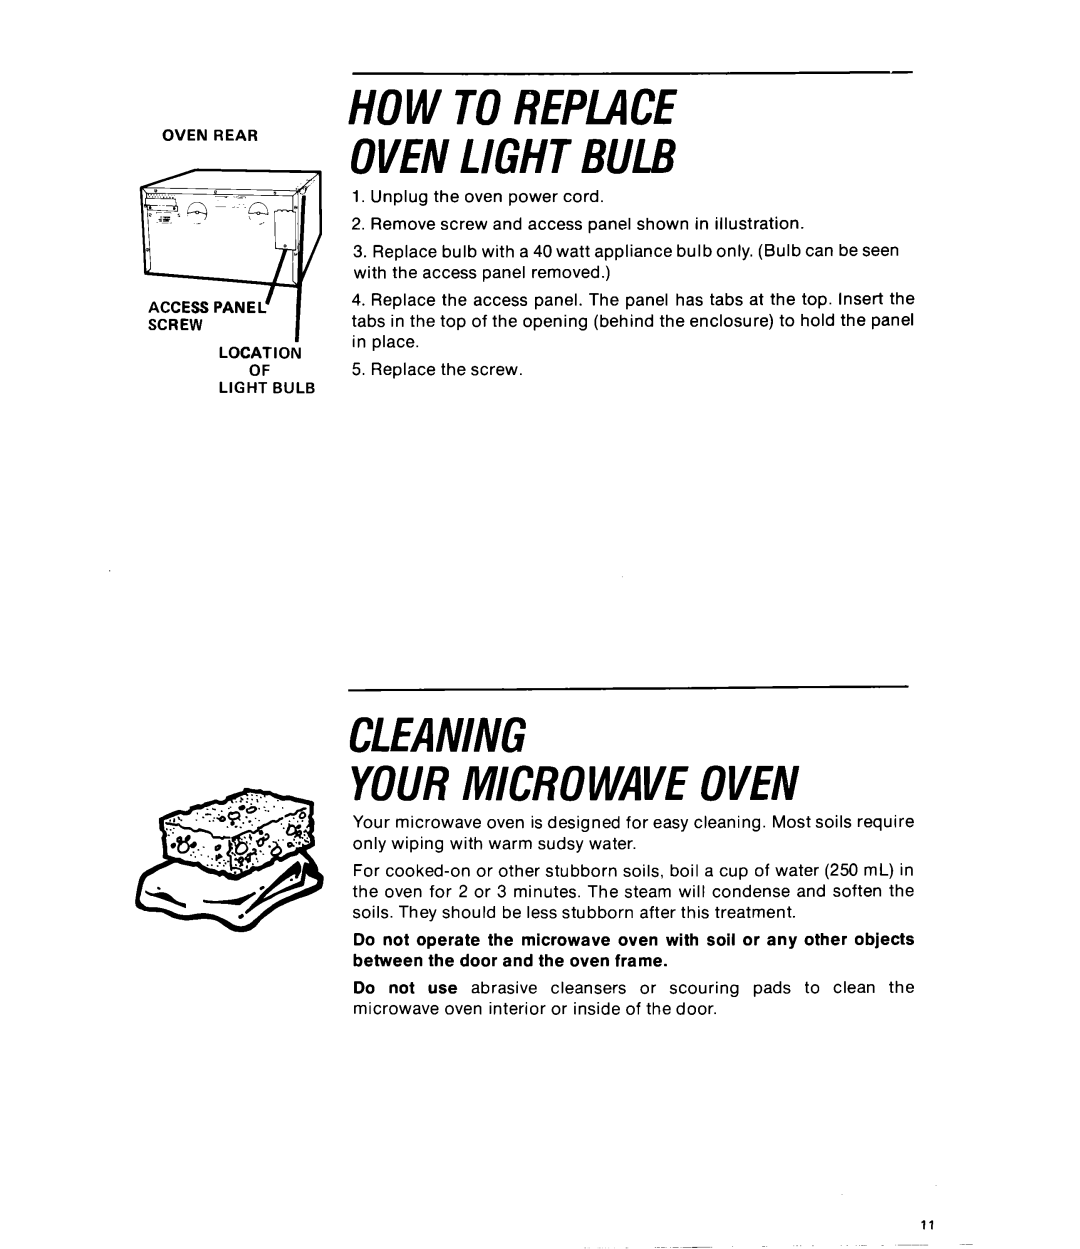 Whirlpool RJM7600 manual Howtoreplace Ovenlightbulb, Cleaning Yourmicrowaveoven 